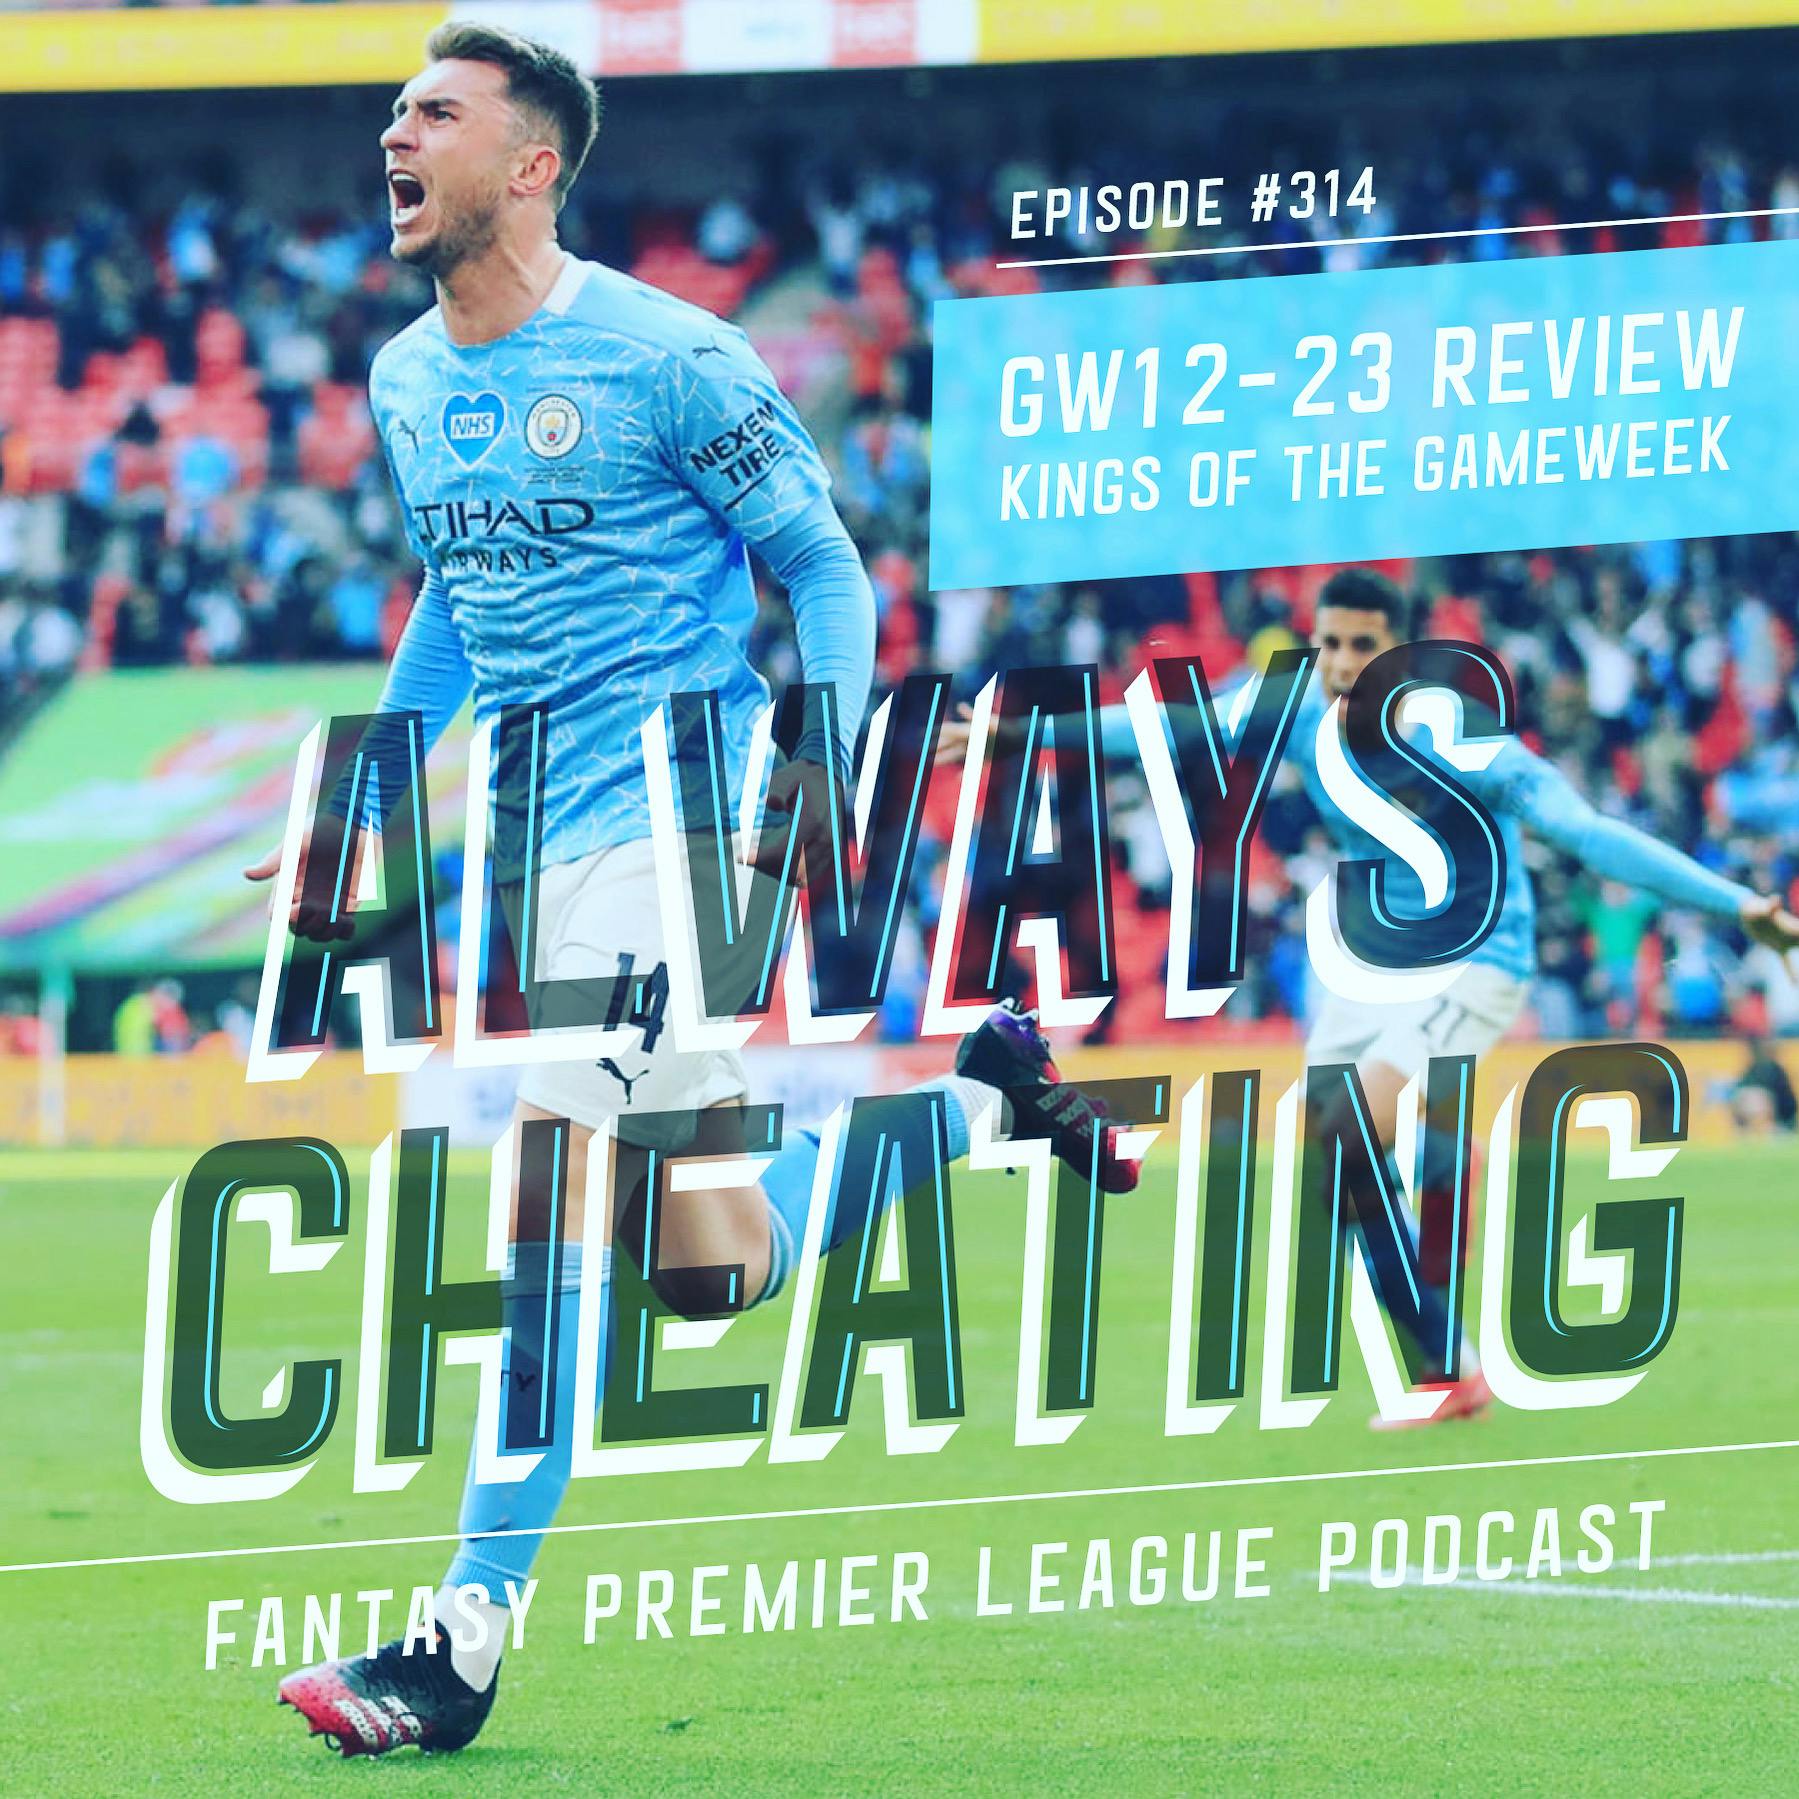 Kings of the Gameweek: A Review of GW12–23